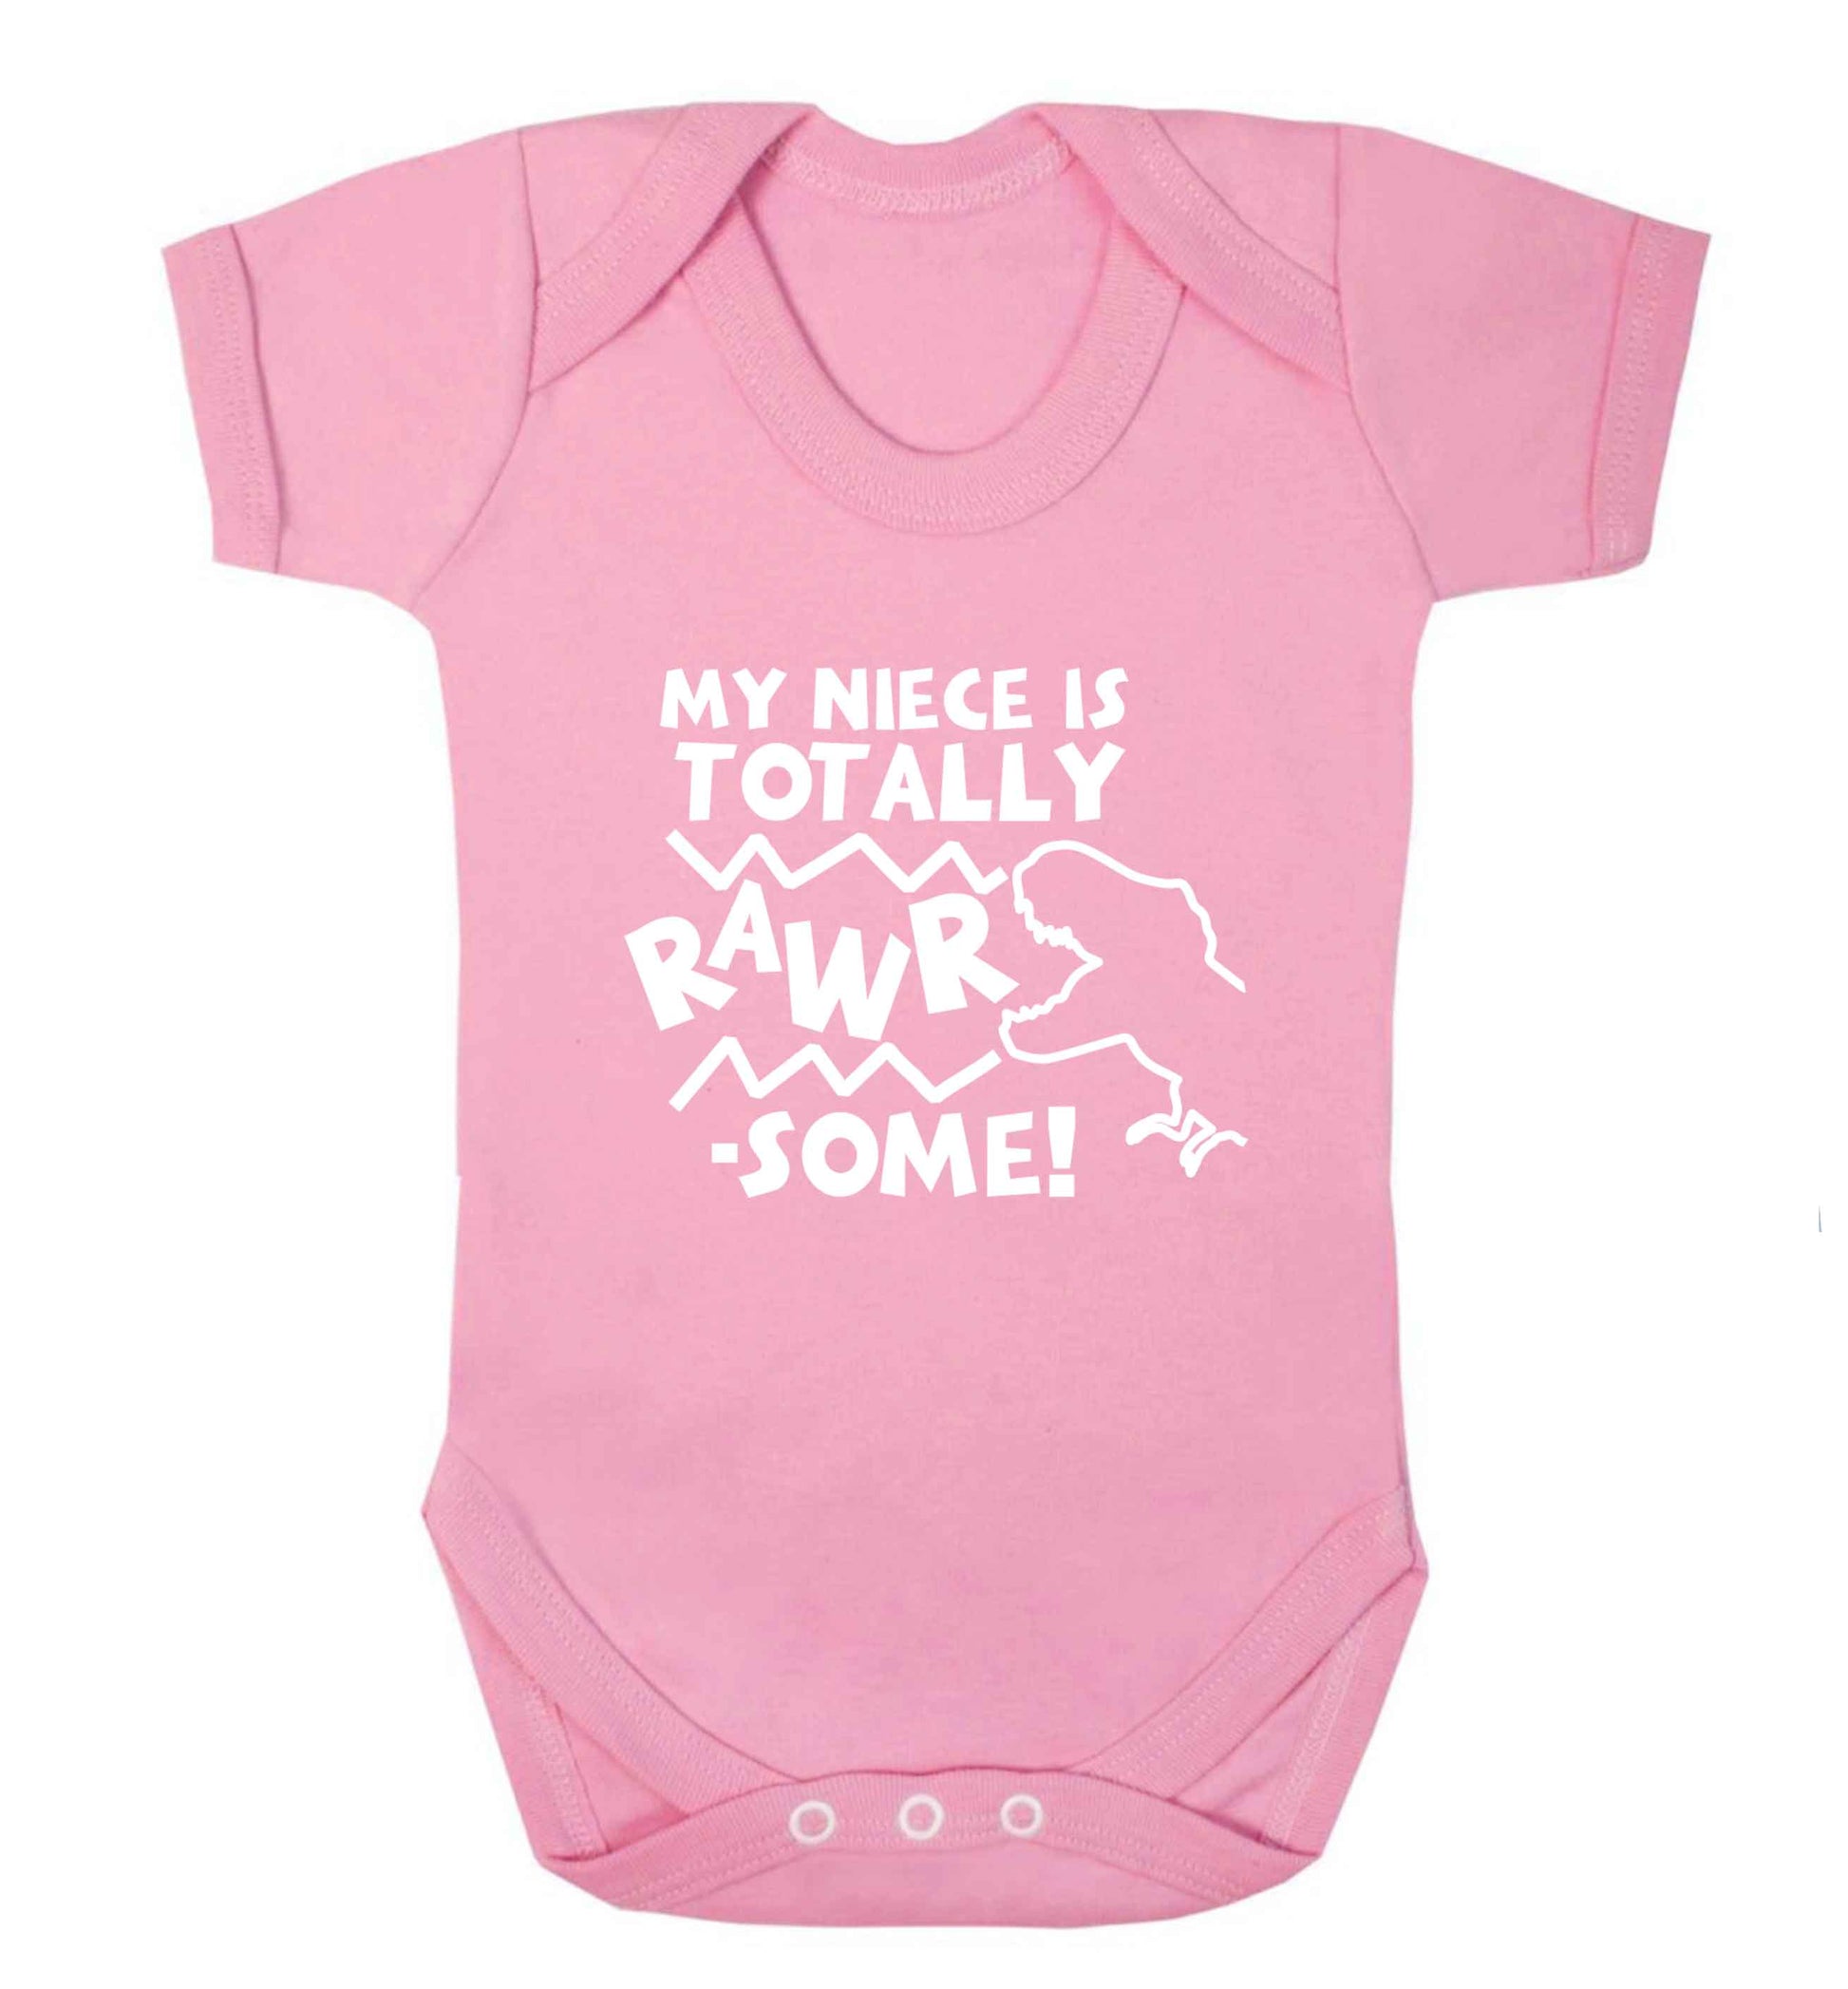 My niece is totally rawrsome baby vest pale pink 18-24 months